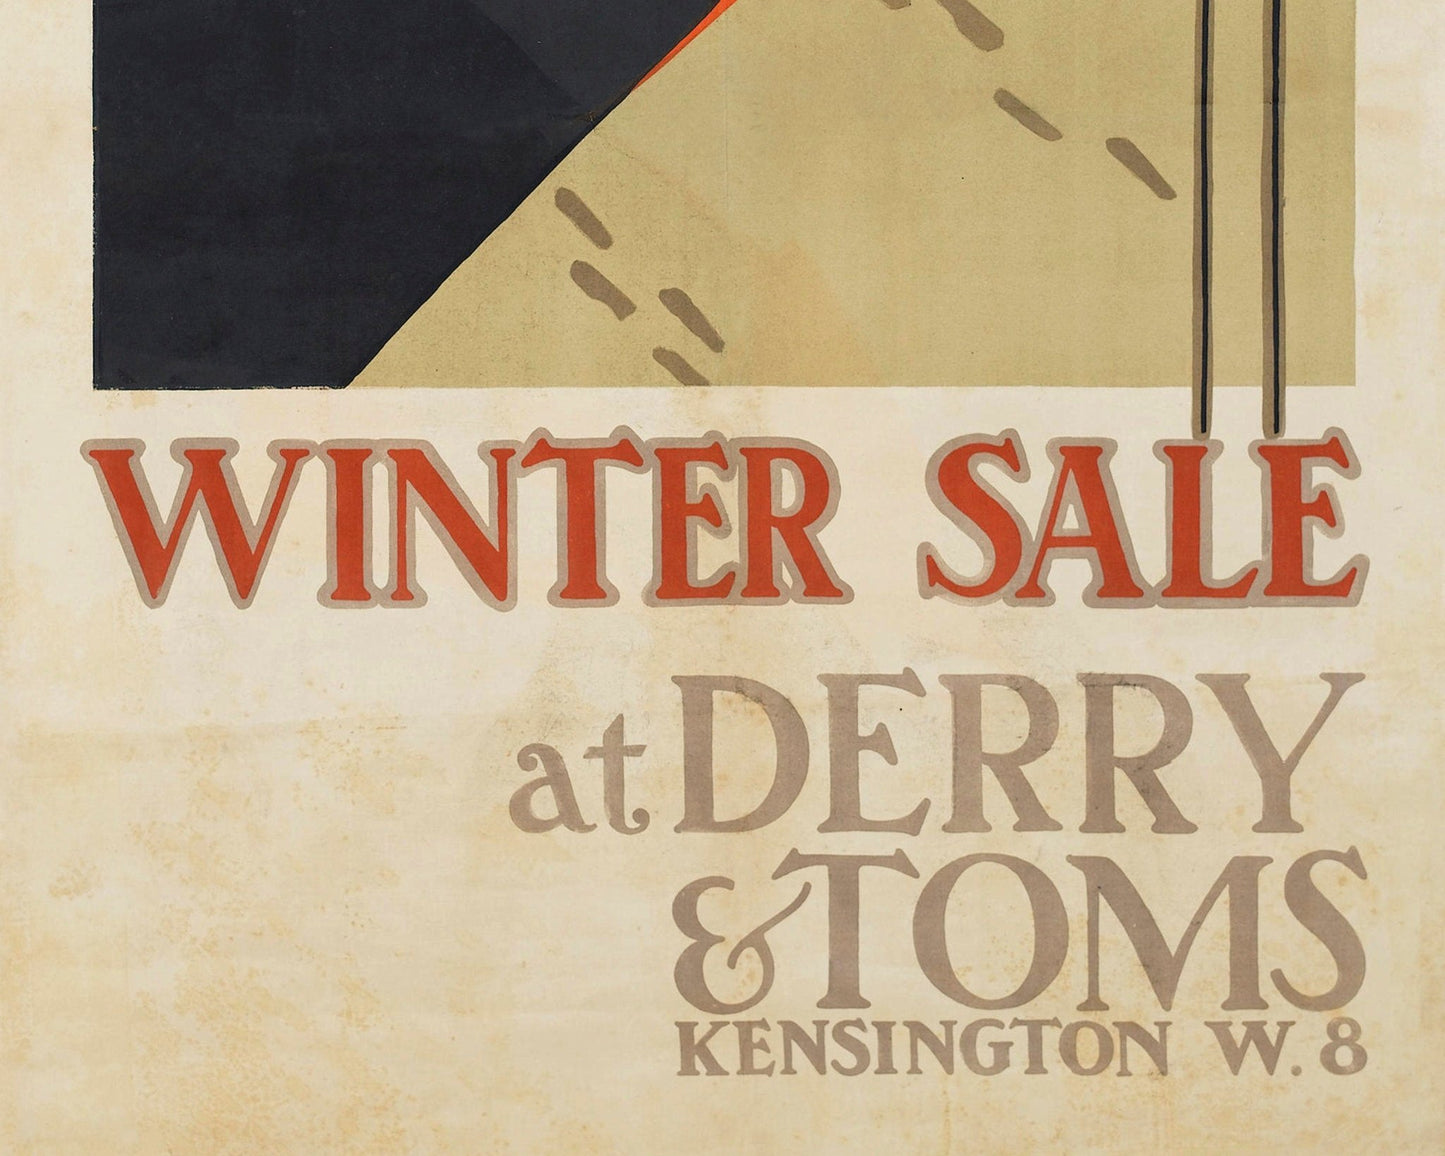 Vintage Fashion Advertising Poster "Winter at Derry & Toms" (c.1919) - Mabon Gallery